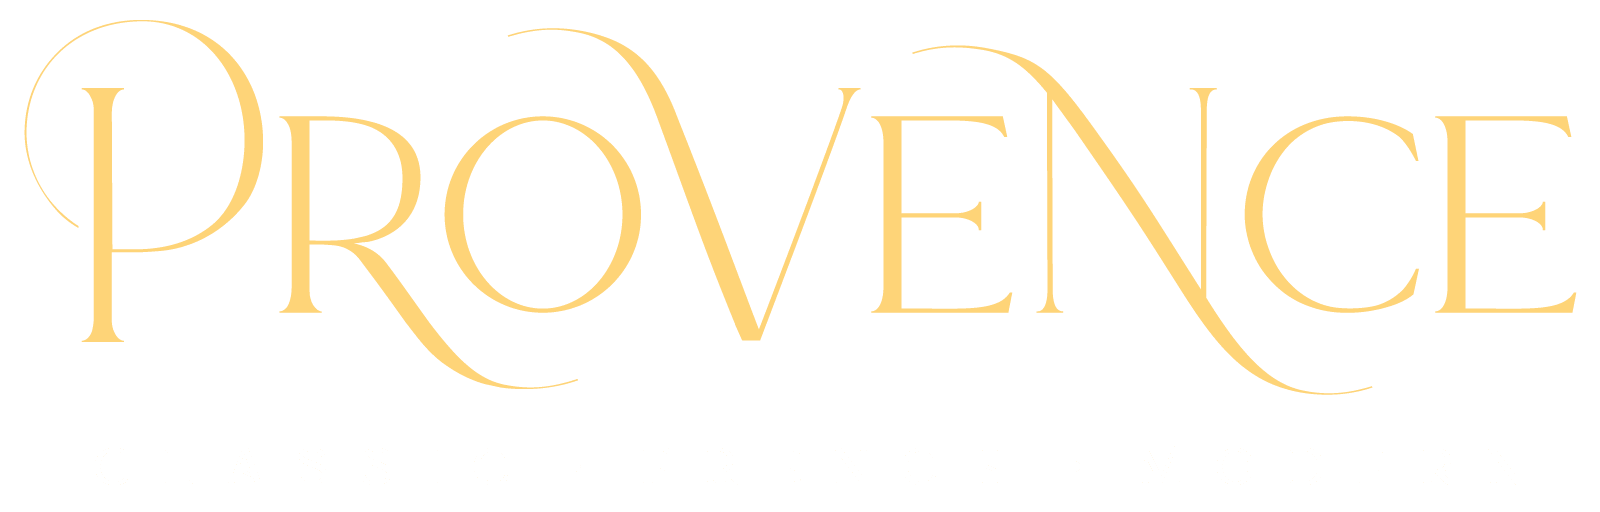 provence logo: classic • french • modern